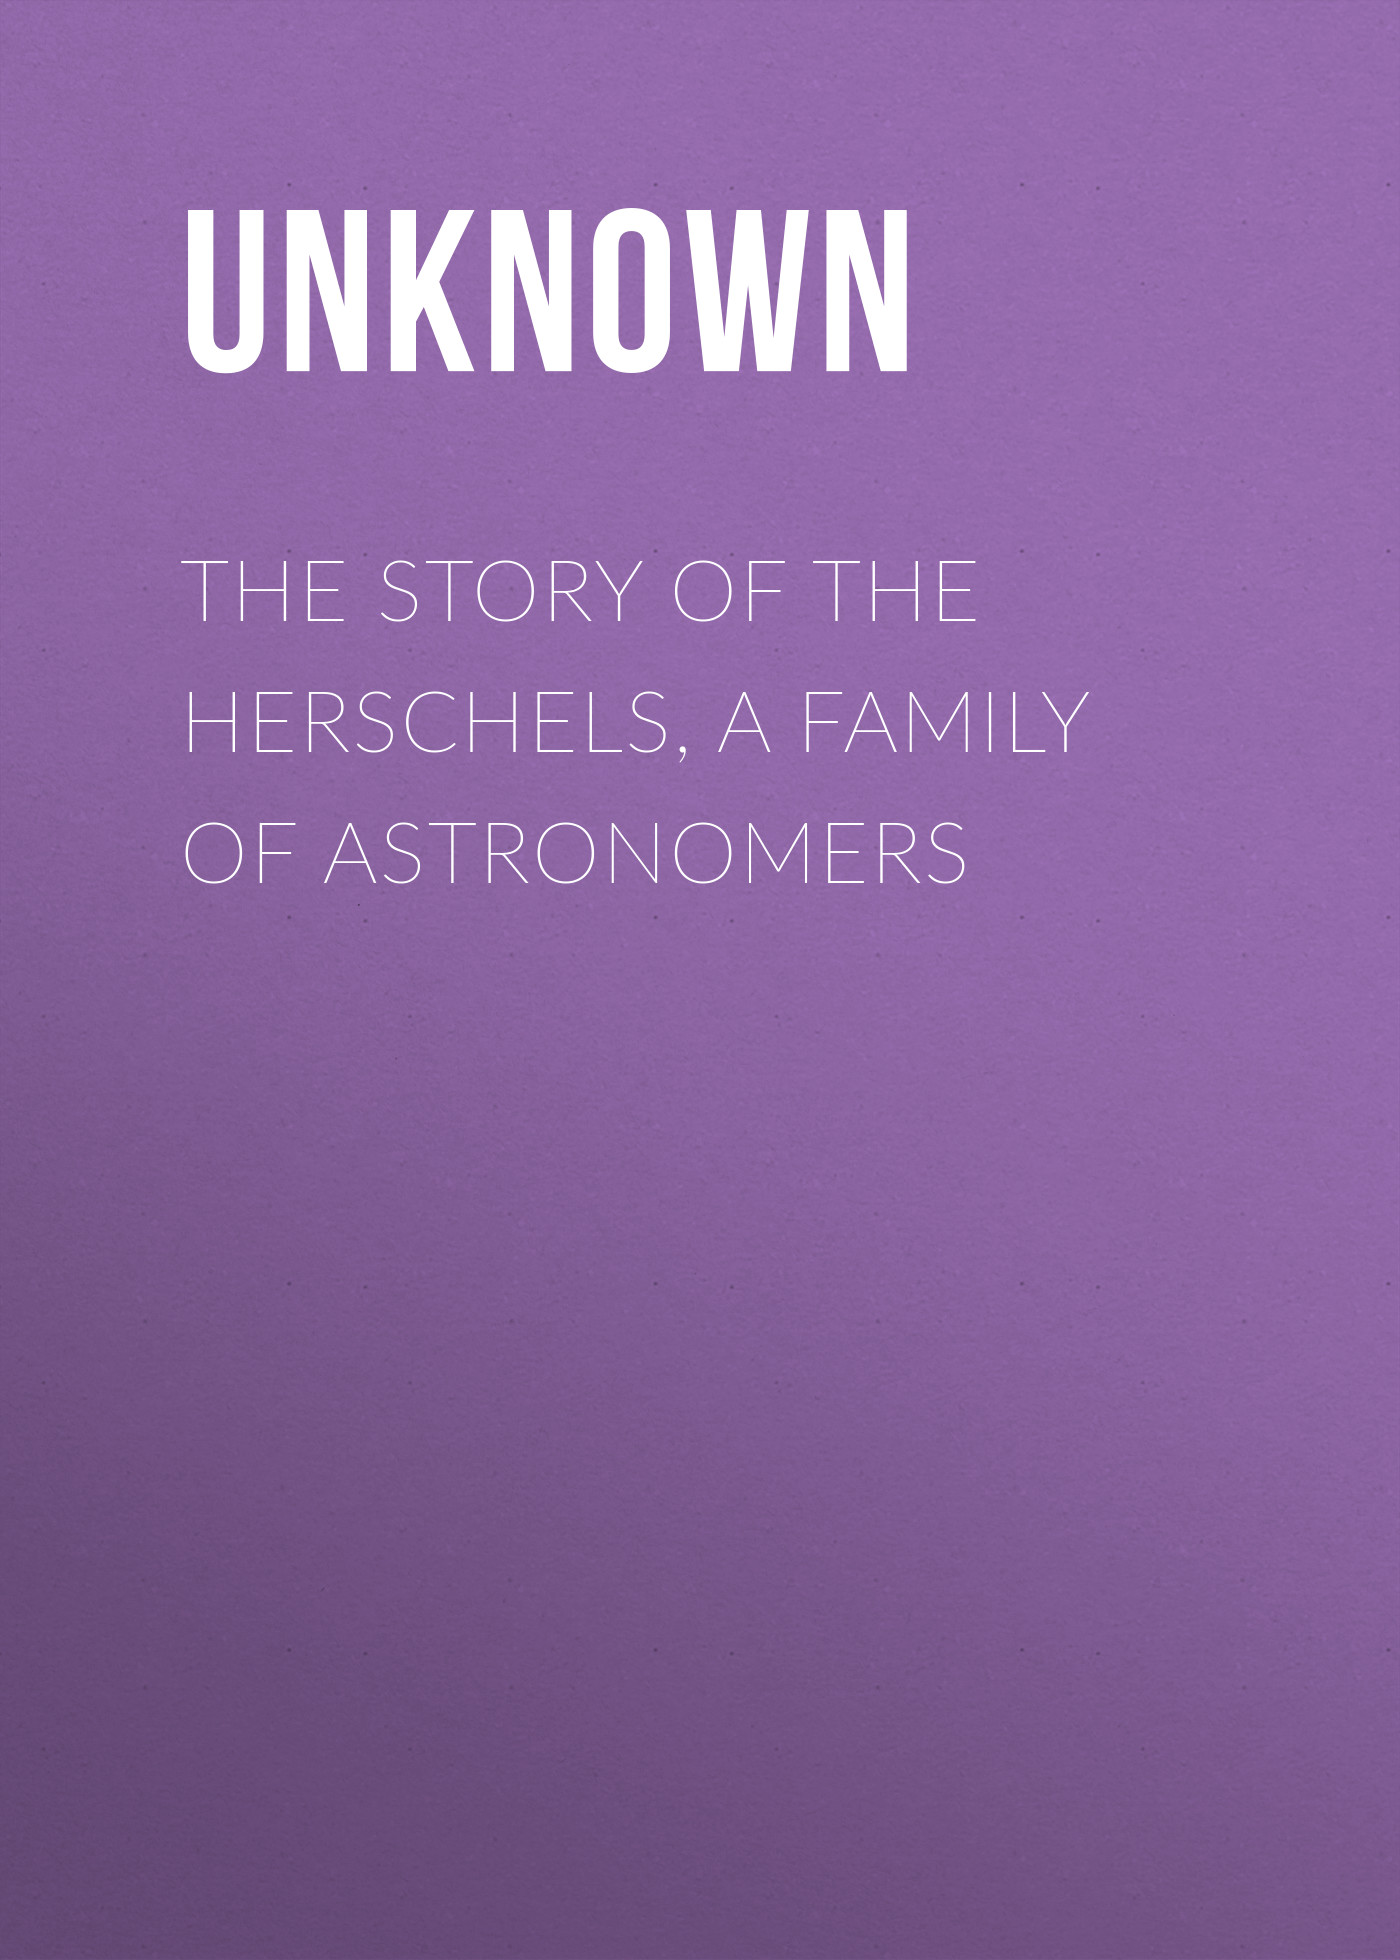 The Story of the Herschels, a Family of Astronomers